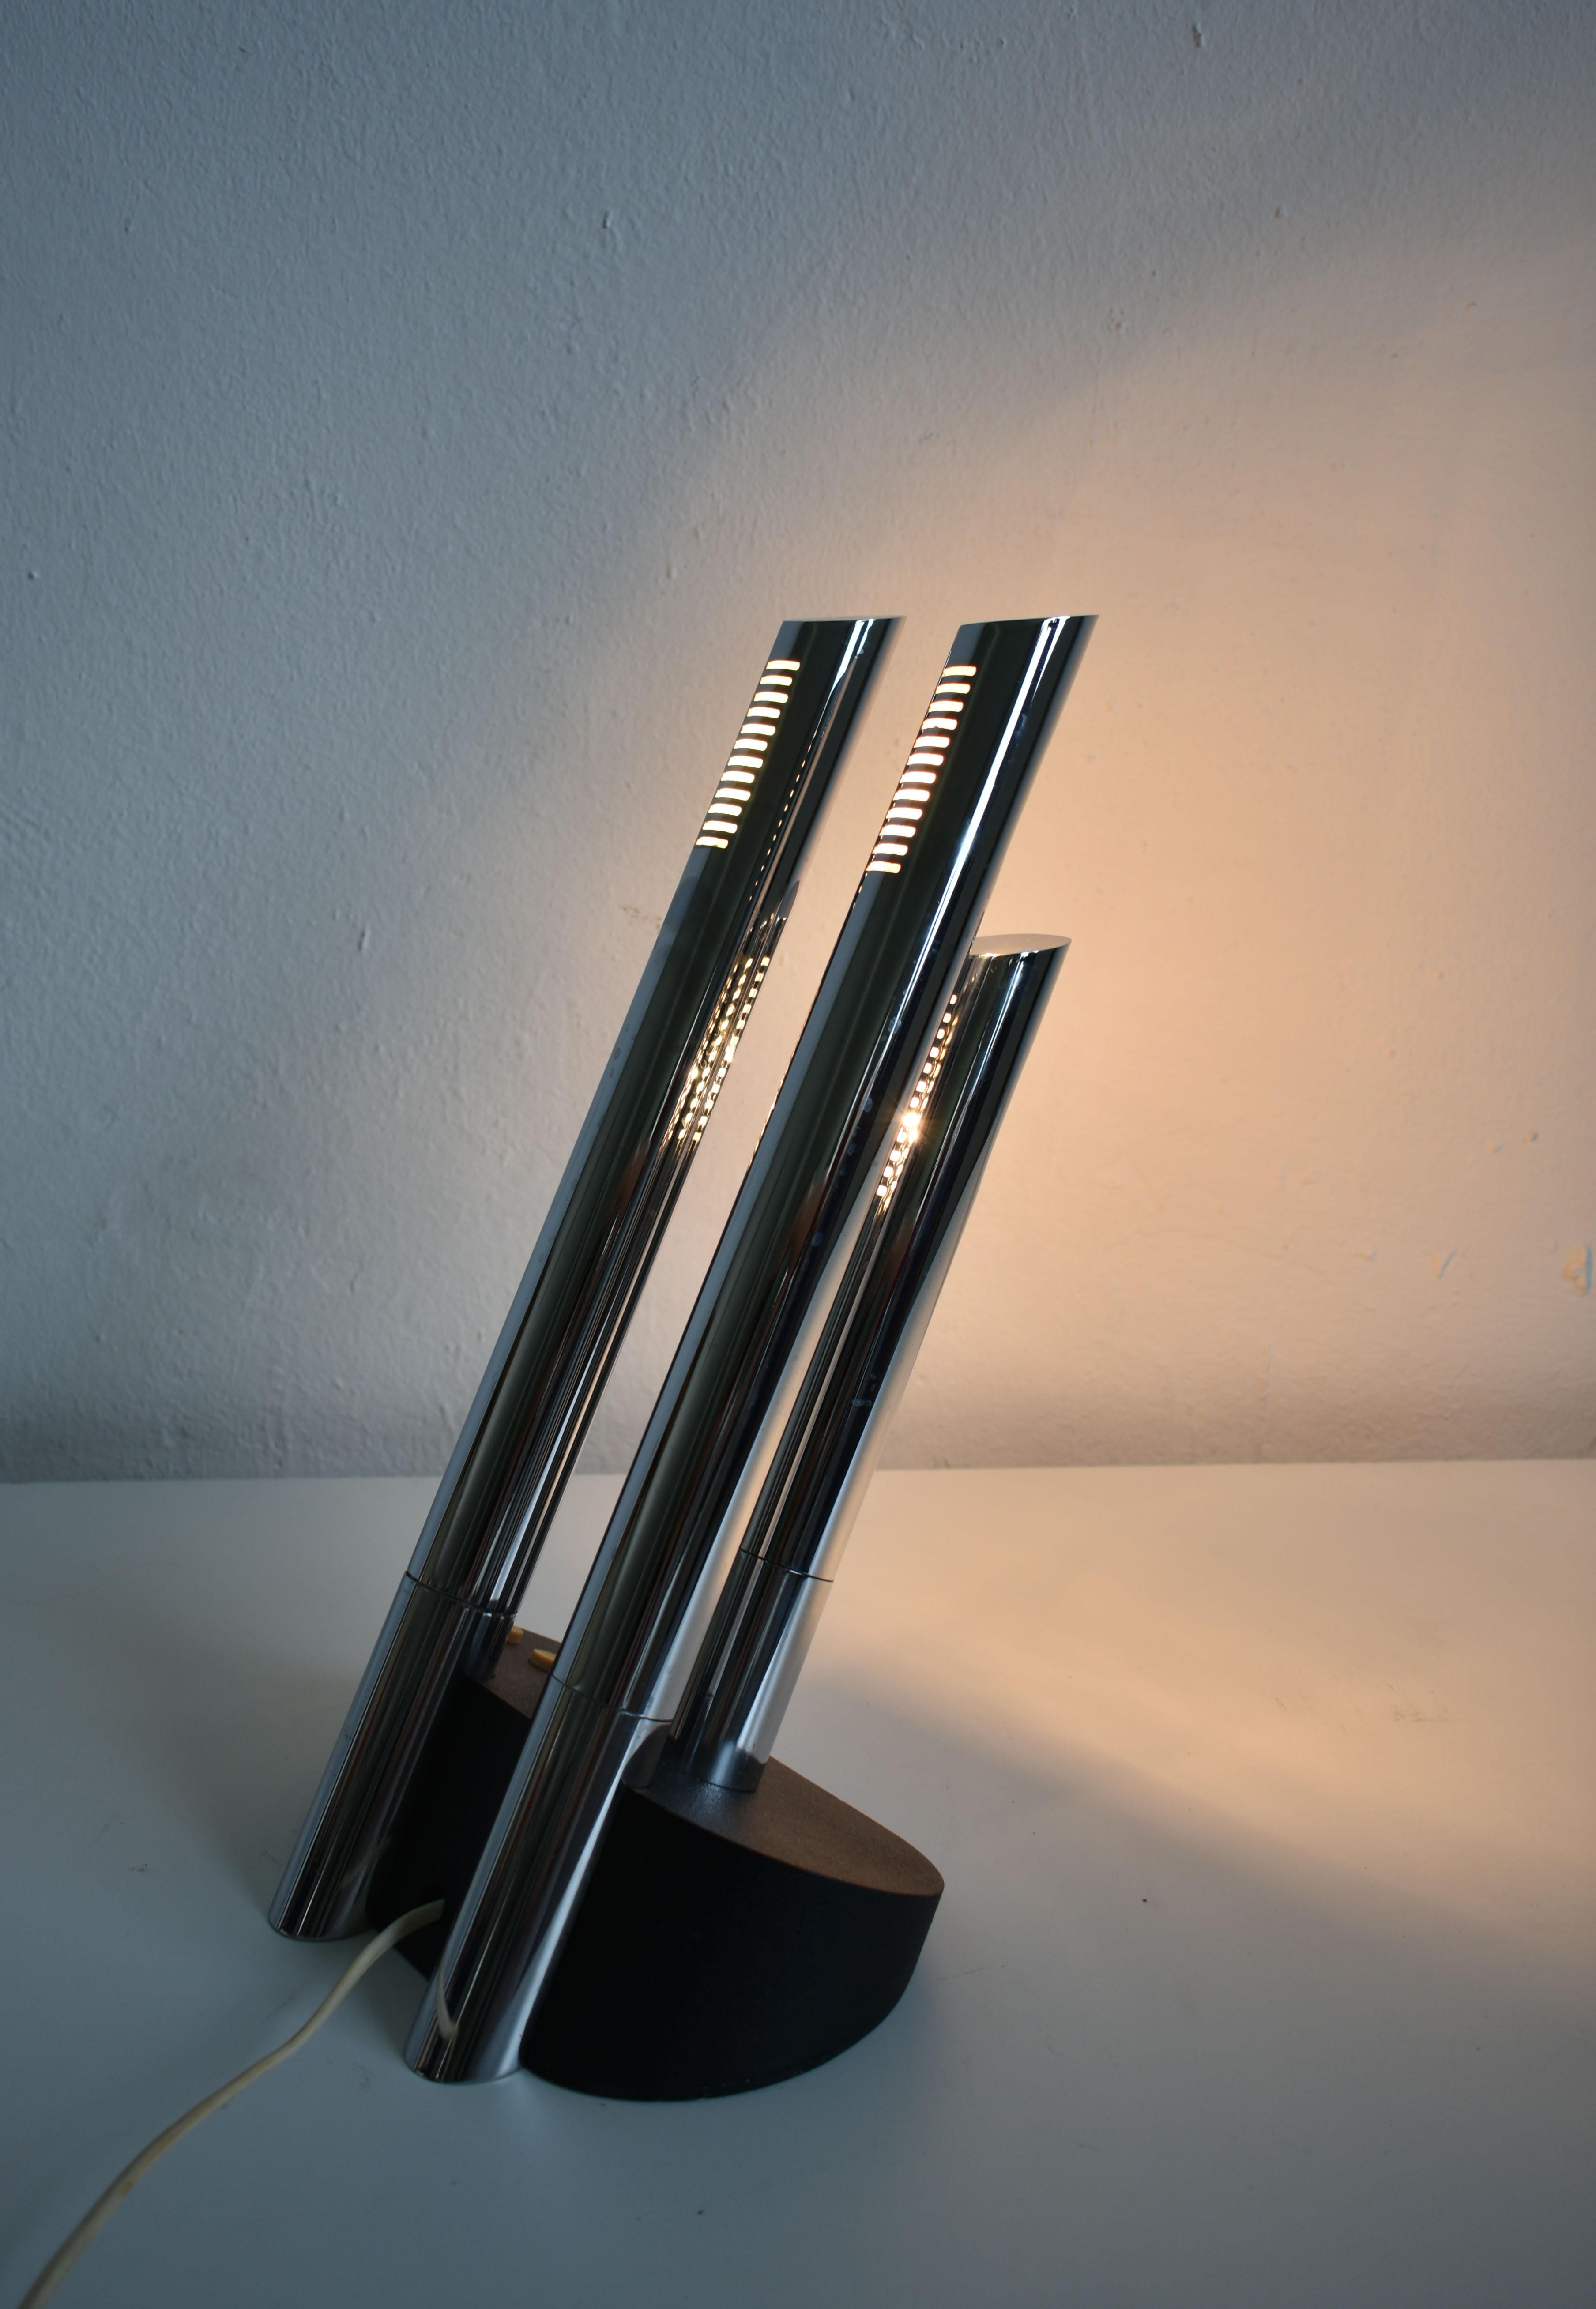 Chrome Table Lamp Designed by Mario Faggian, Model T443, Produced by Luci, Italy, 1970s